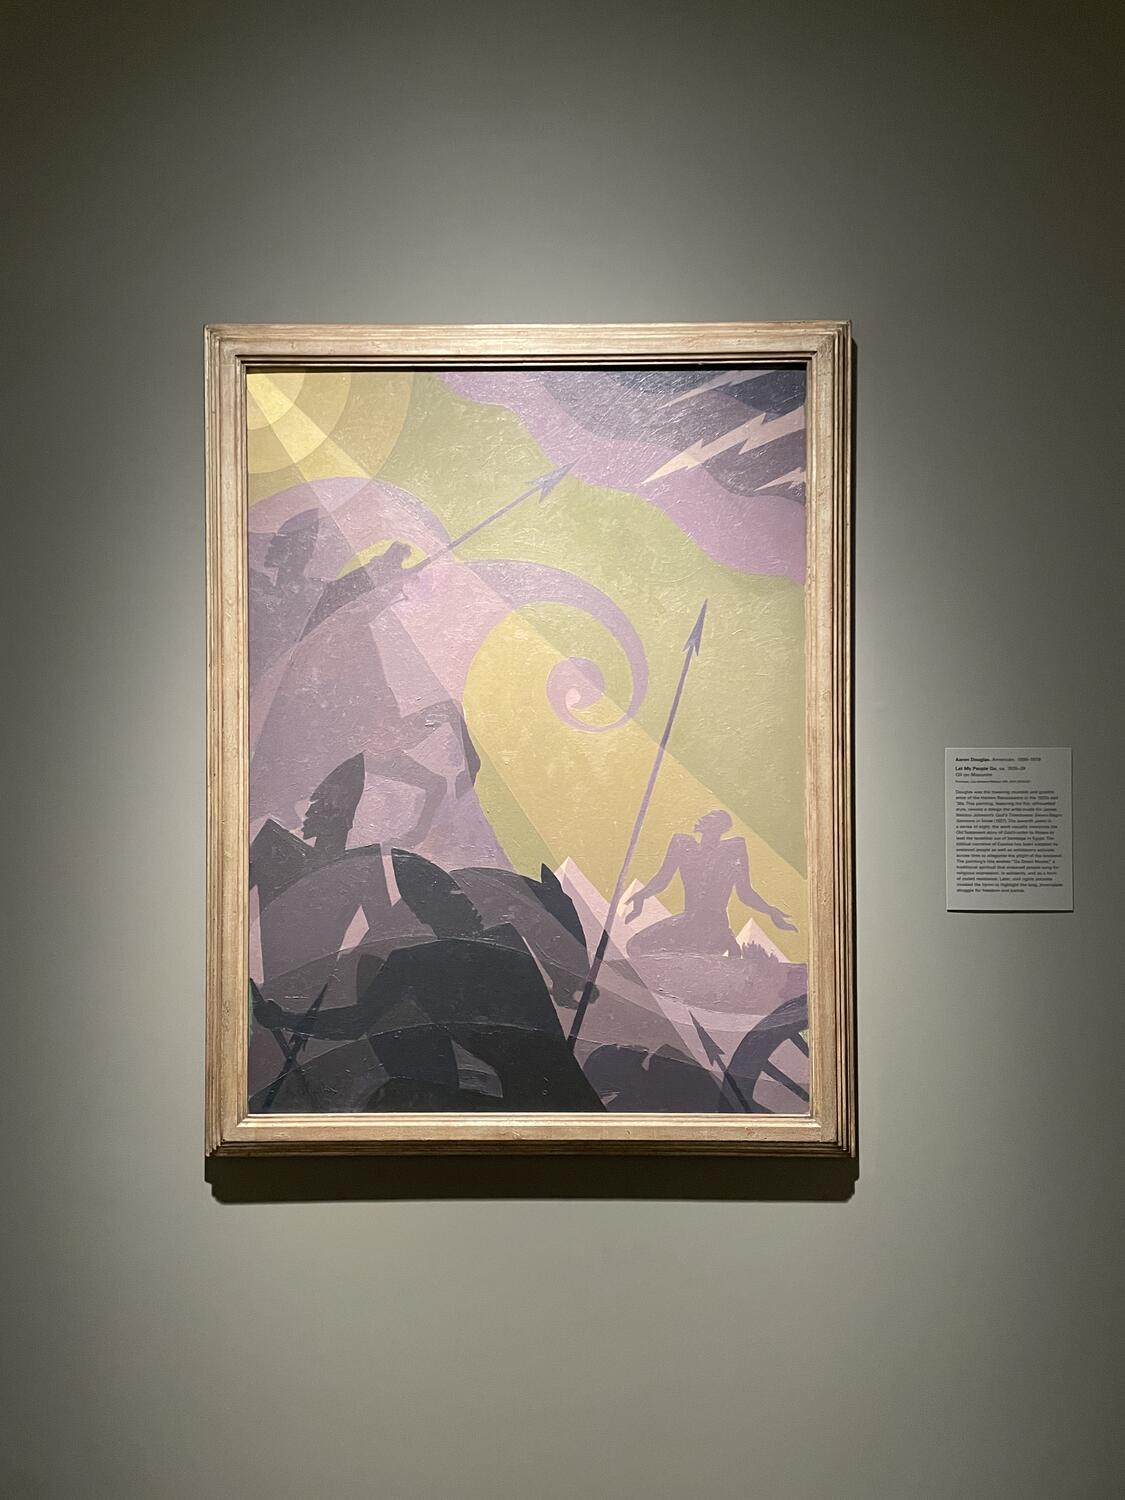 An abstract painting in pastel purples and greens. Wispy waves or clouds descending on a small figure in the background illuminated by a beam of light from the top-left corner of the frame. Imposing figures in pointed helmets on horseback with spears appear to be descending on the lone figure.